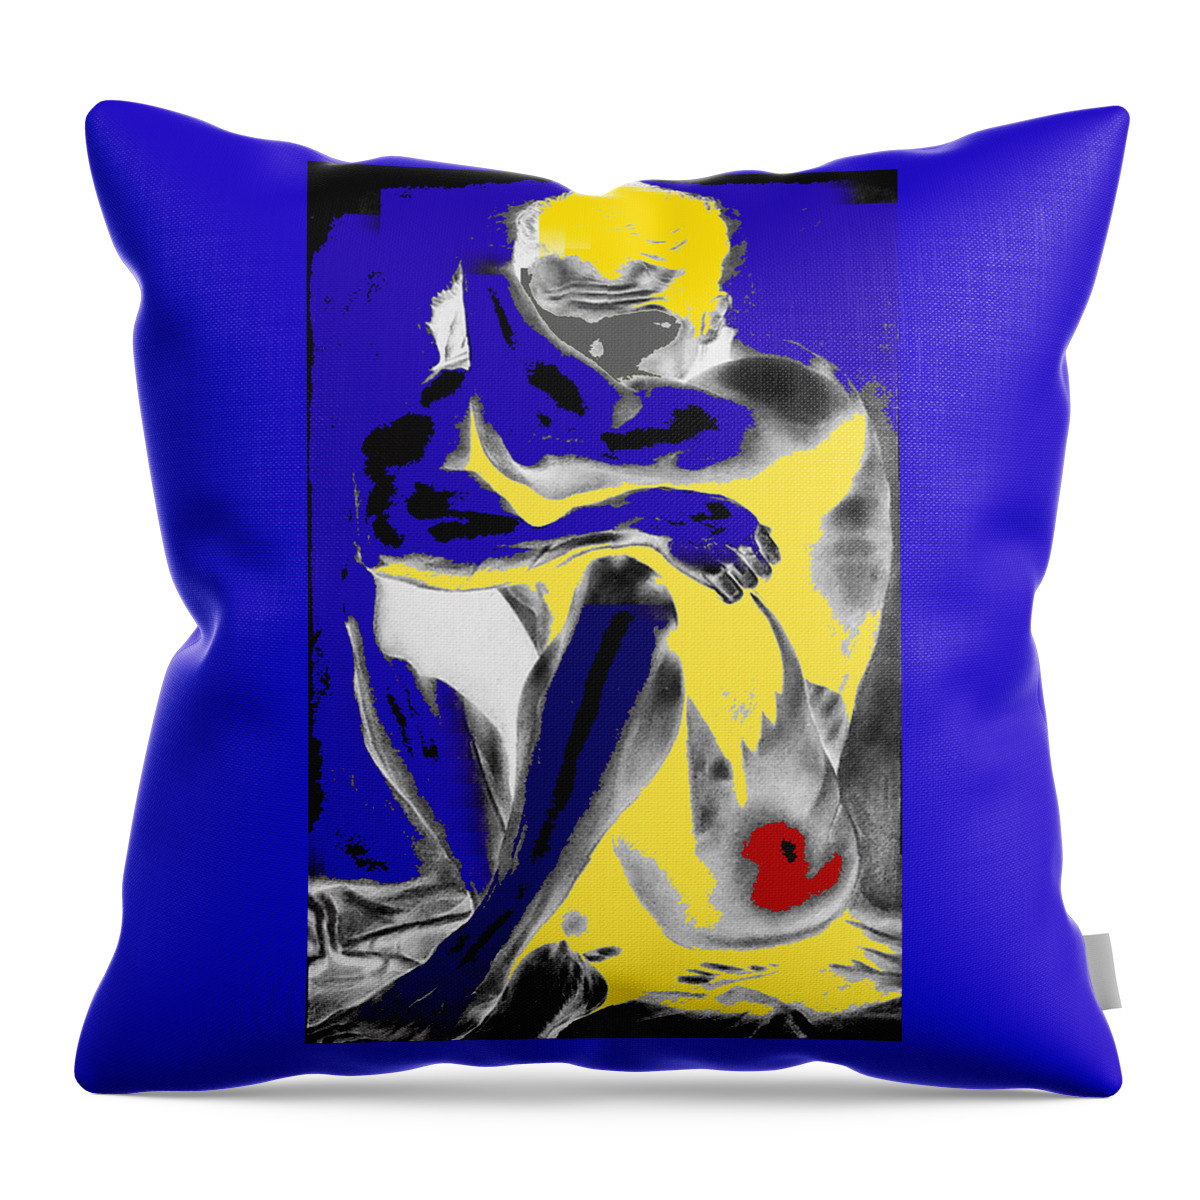 Original Contemporary Nude Male Painting Throw Pillow featuring the painting Original Contemporary Painting A Handsome Nude Man by RjFxx at beautifullart com Friedenthal